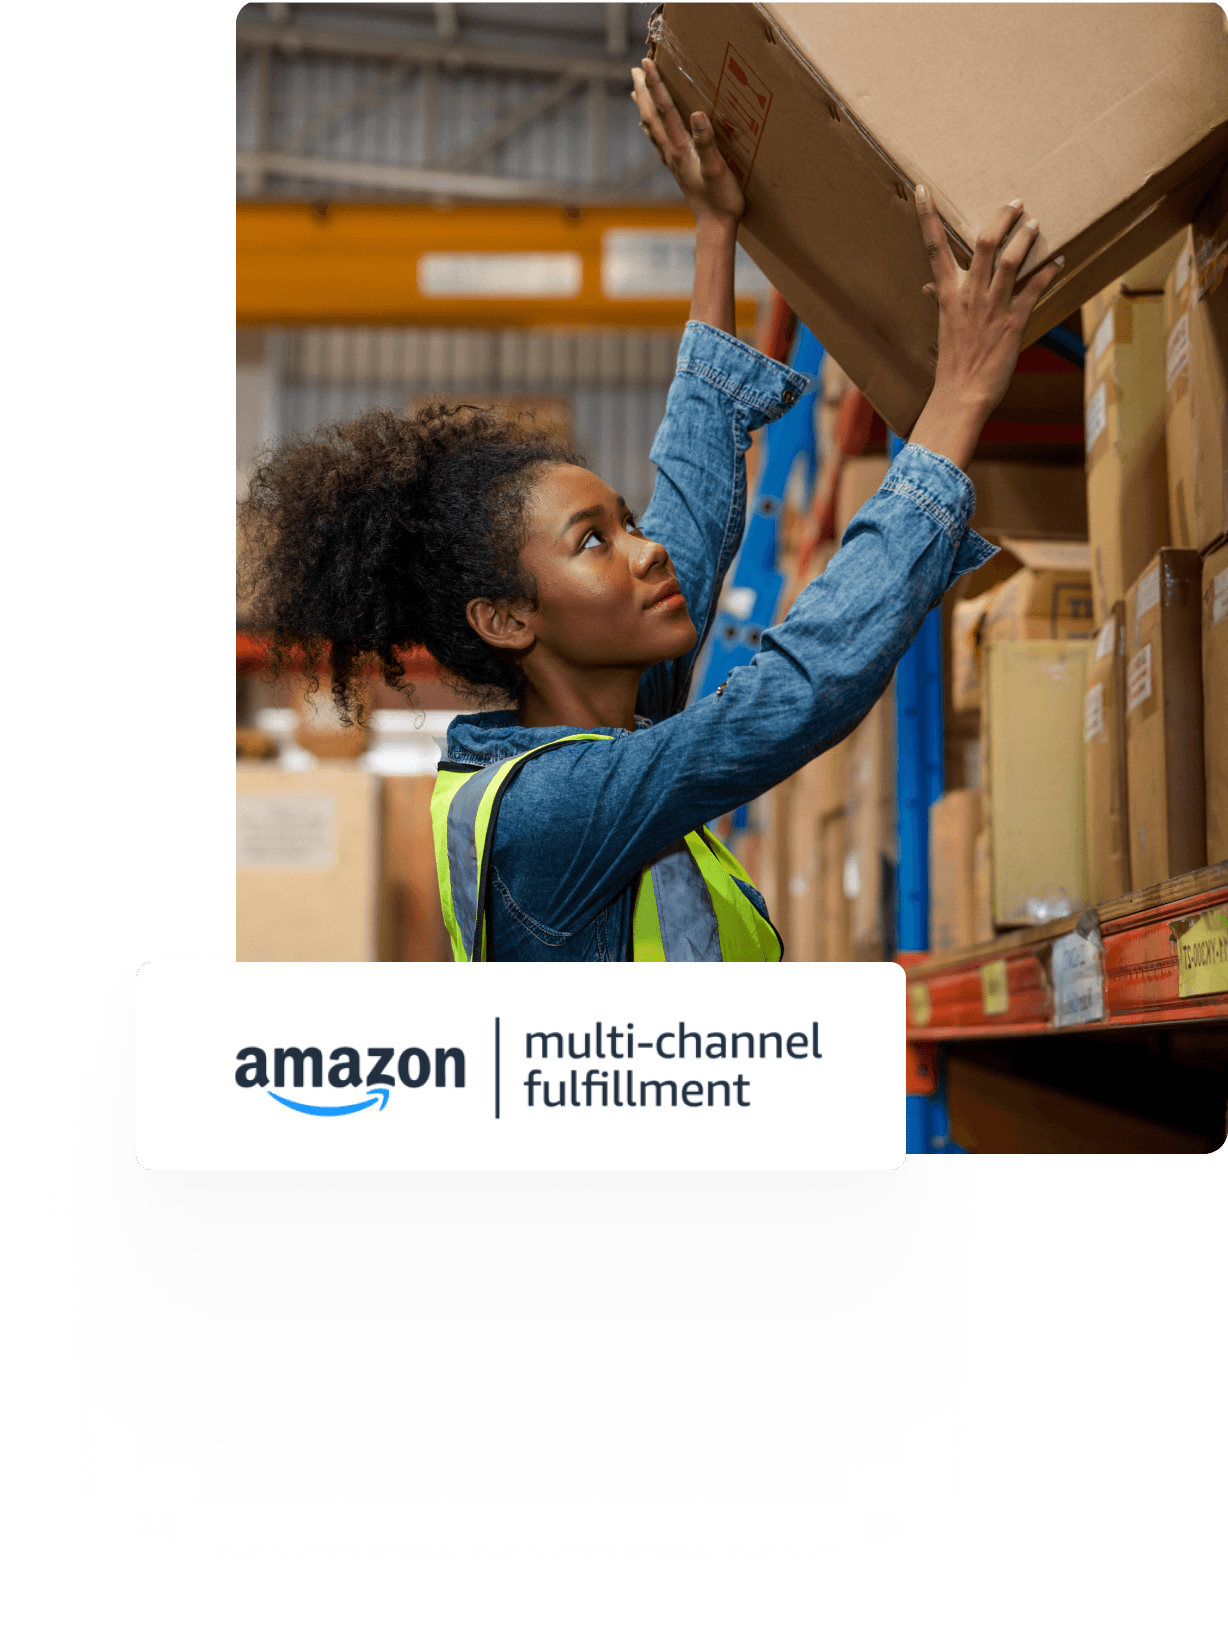 Ship all your Amazon orders with Veeqo